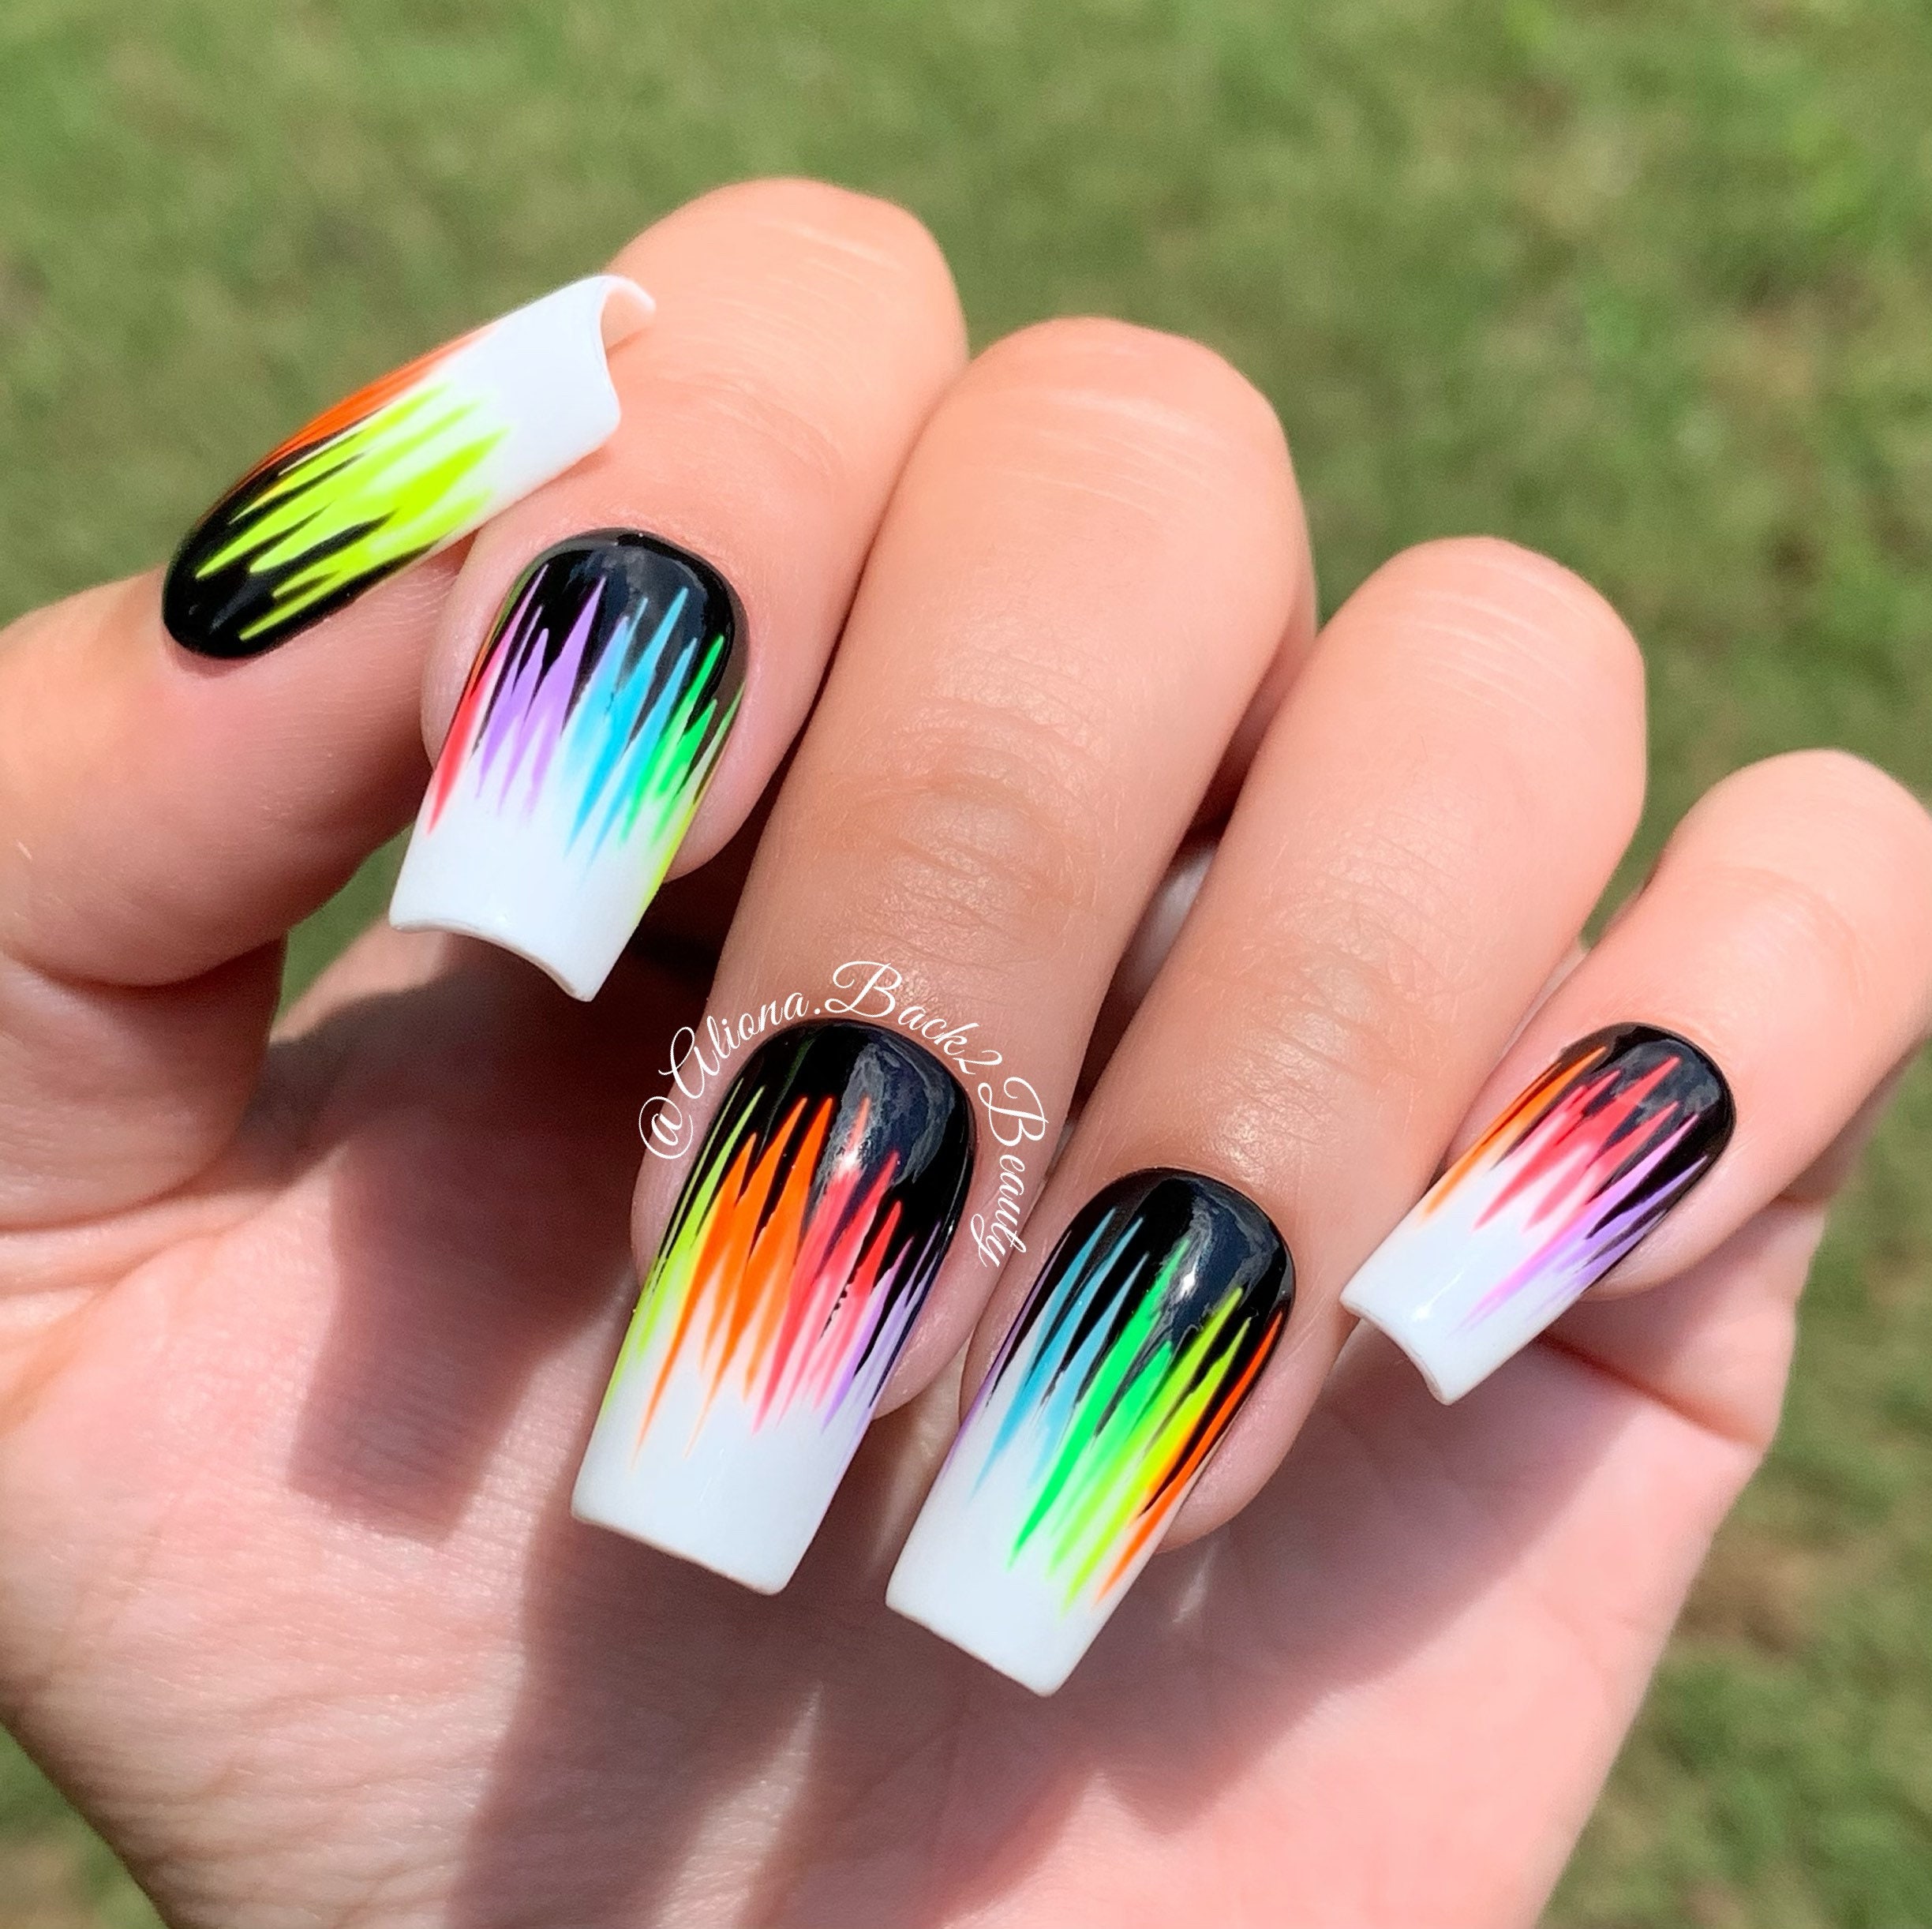 Neon Bright Summer Nails: 33+ Fun Playful Ideas with Lots of Color - Nail  Designs Daily | Neon acrylic nails, Bright summer nails designs, Neon nail  designs